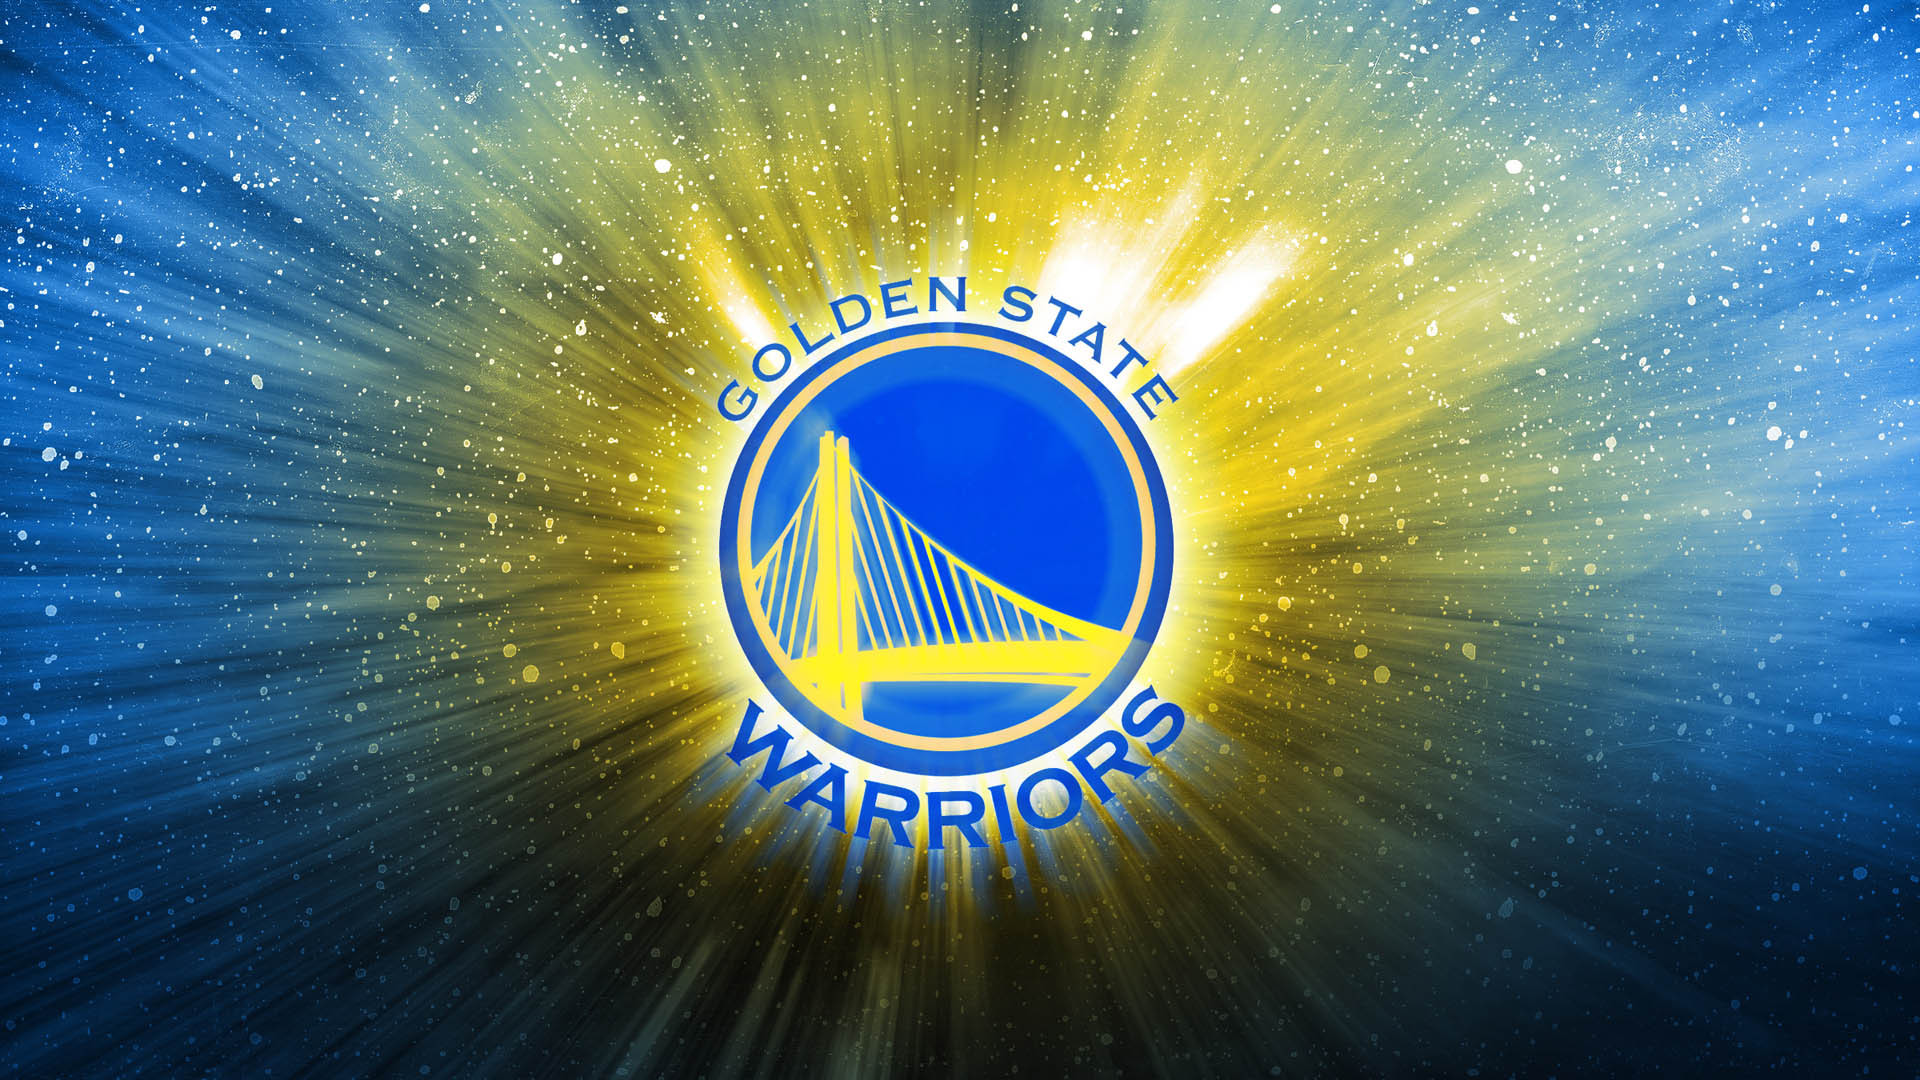 Golden State Warriors Wallpapers Images Photos Pictures Backgrounds